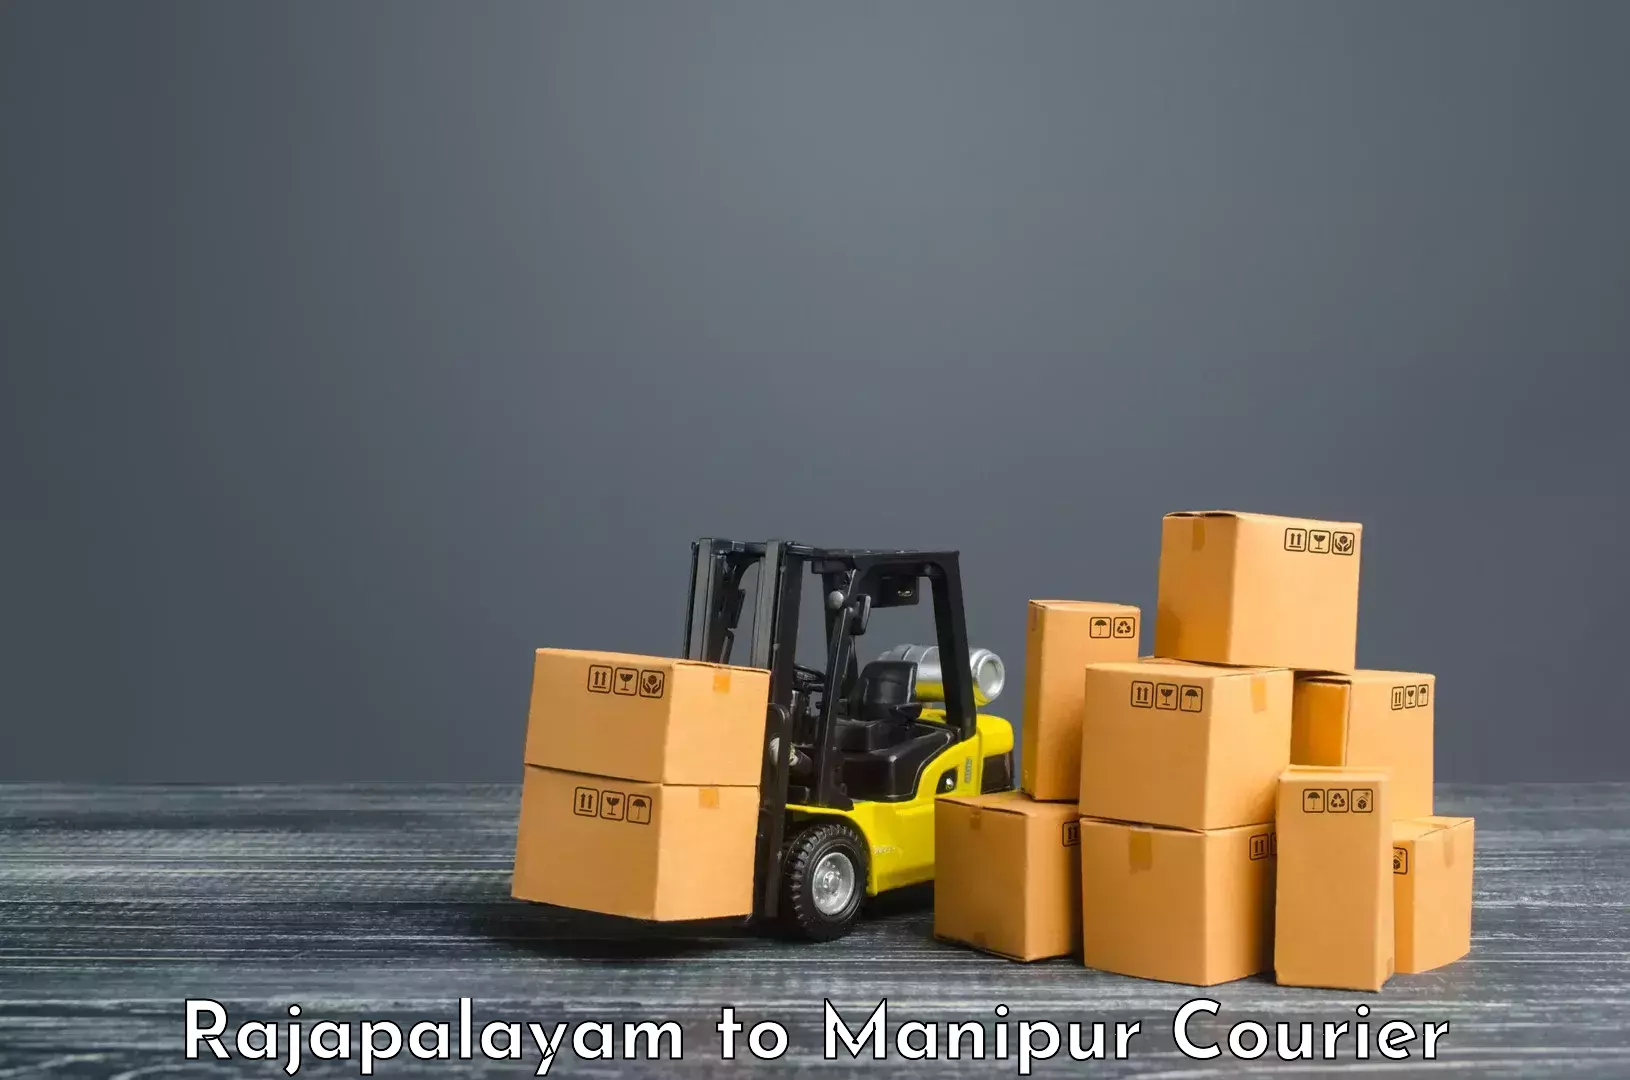 Courier service partnerships Rajapalayam to Chandel